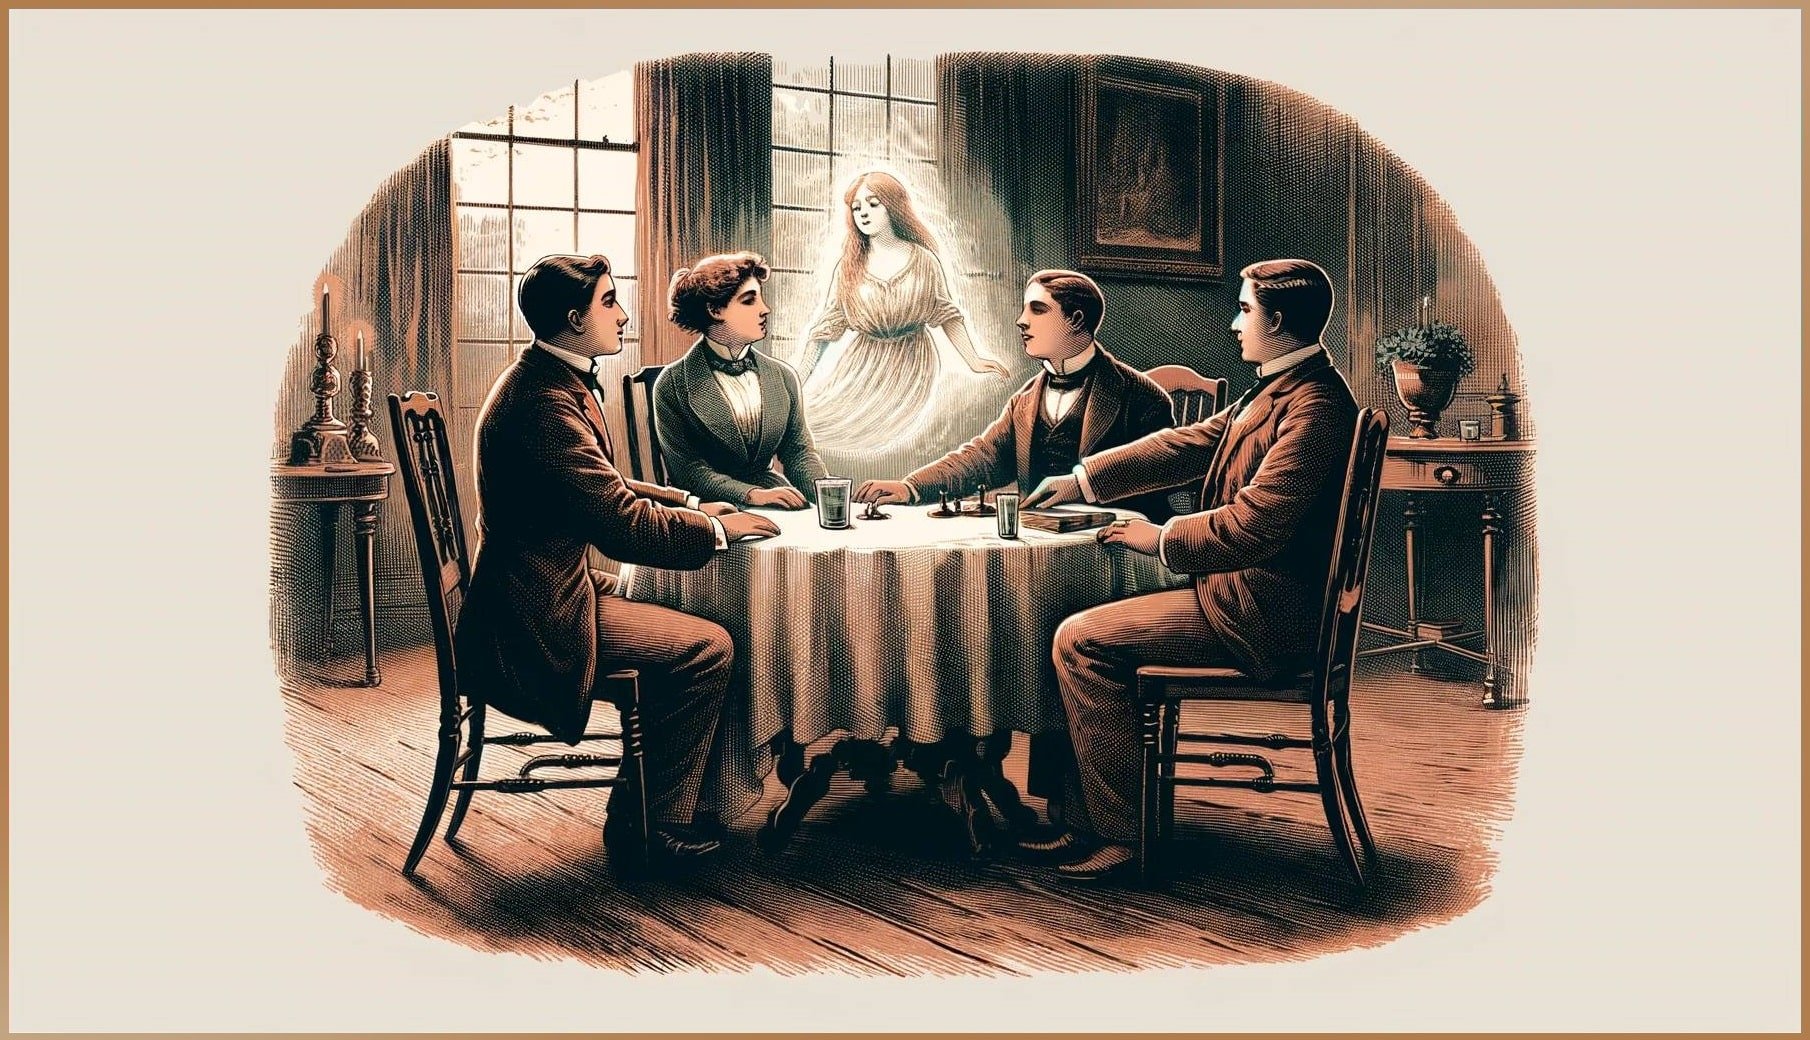 An old-fashioned, colored engraving of a 19th-century séance with four individuals around a table, eyes fixed on a luminous apparition of a woman, symbolizing communication with the spirit realm.